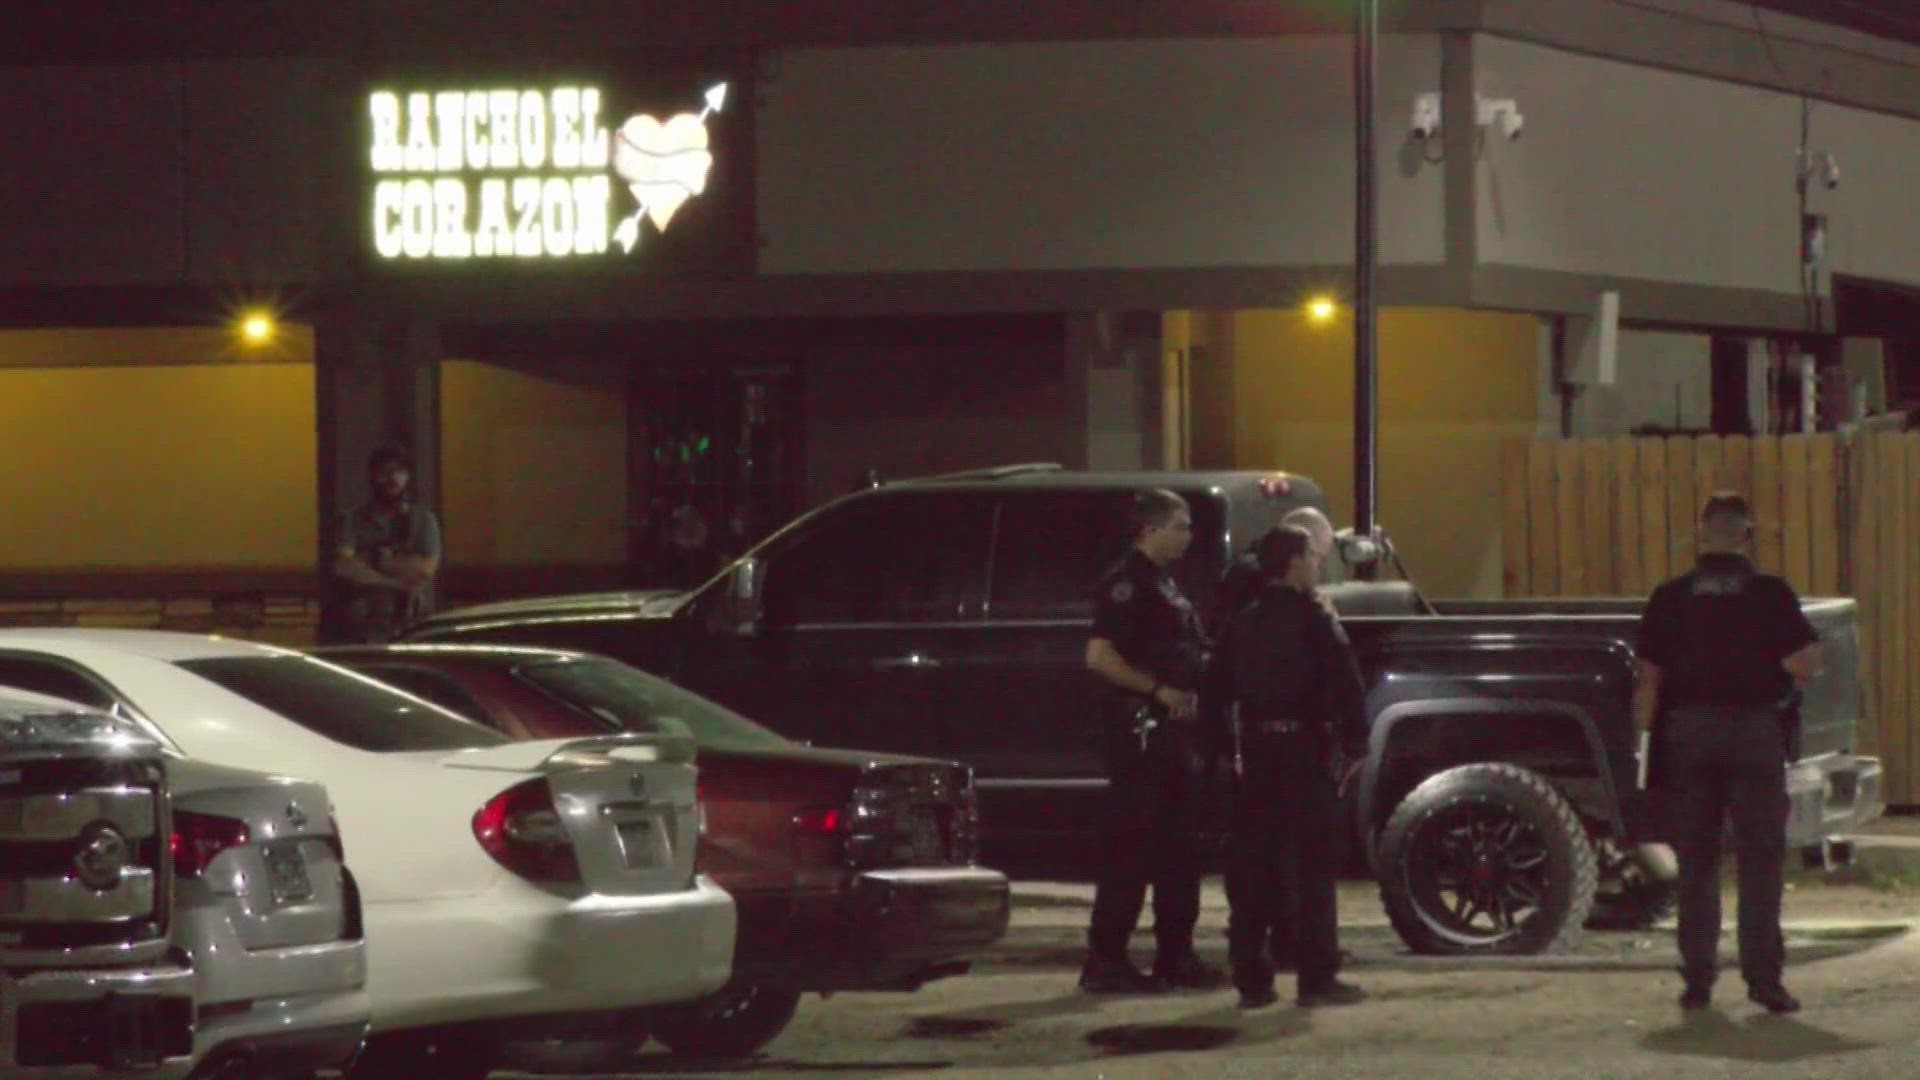 Investigators said a masked suspect arrived outside the bar in a vehicle, got out and fired dozens of rounds from a rifle at patrons standing outside.